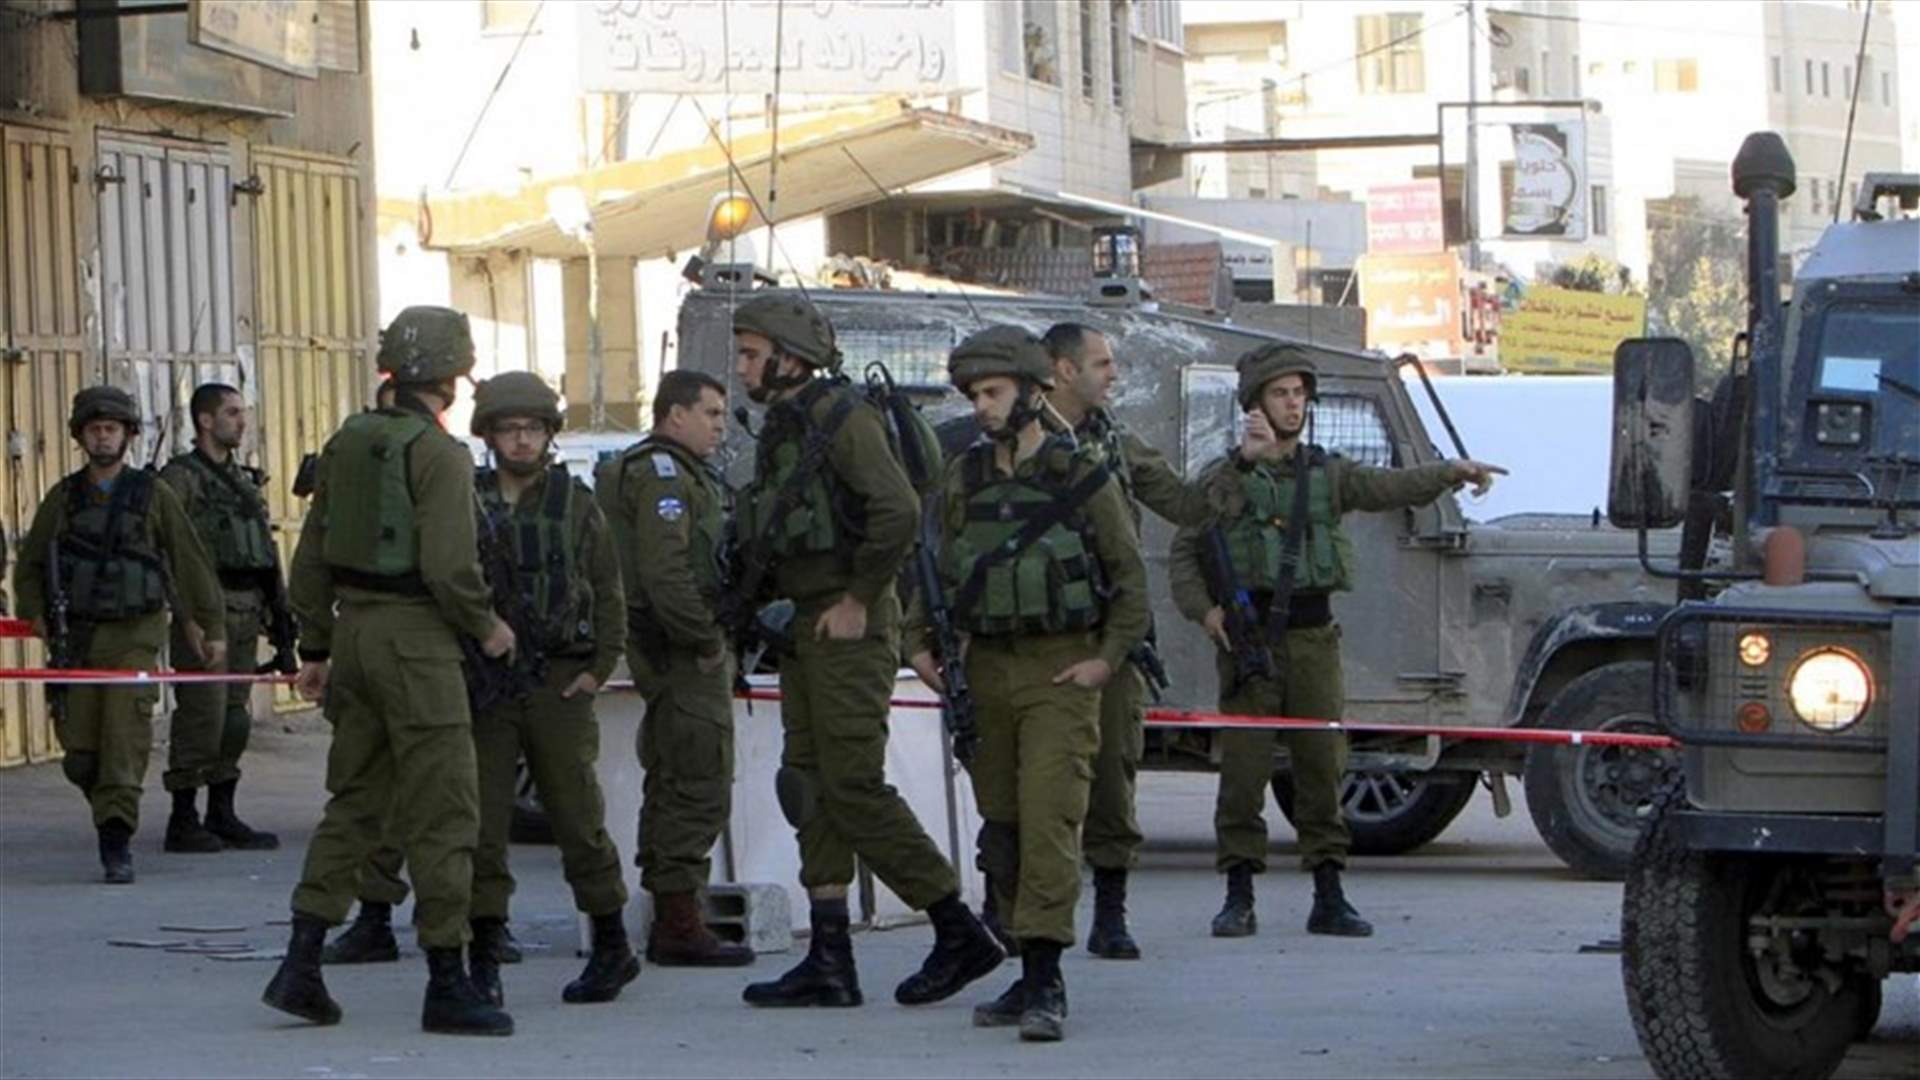 Palestinian shot dead trying to stab Israeli soldier - military